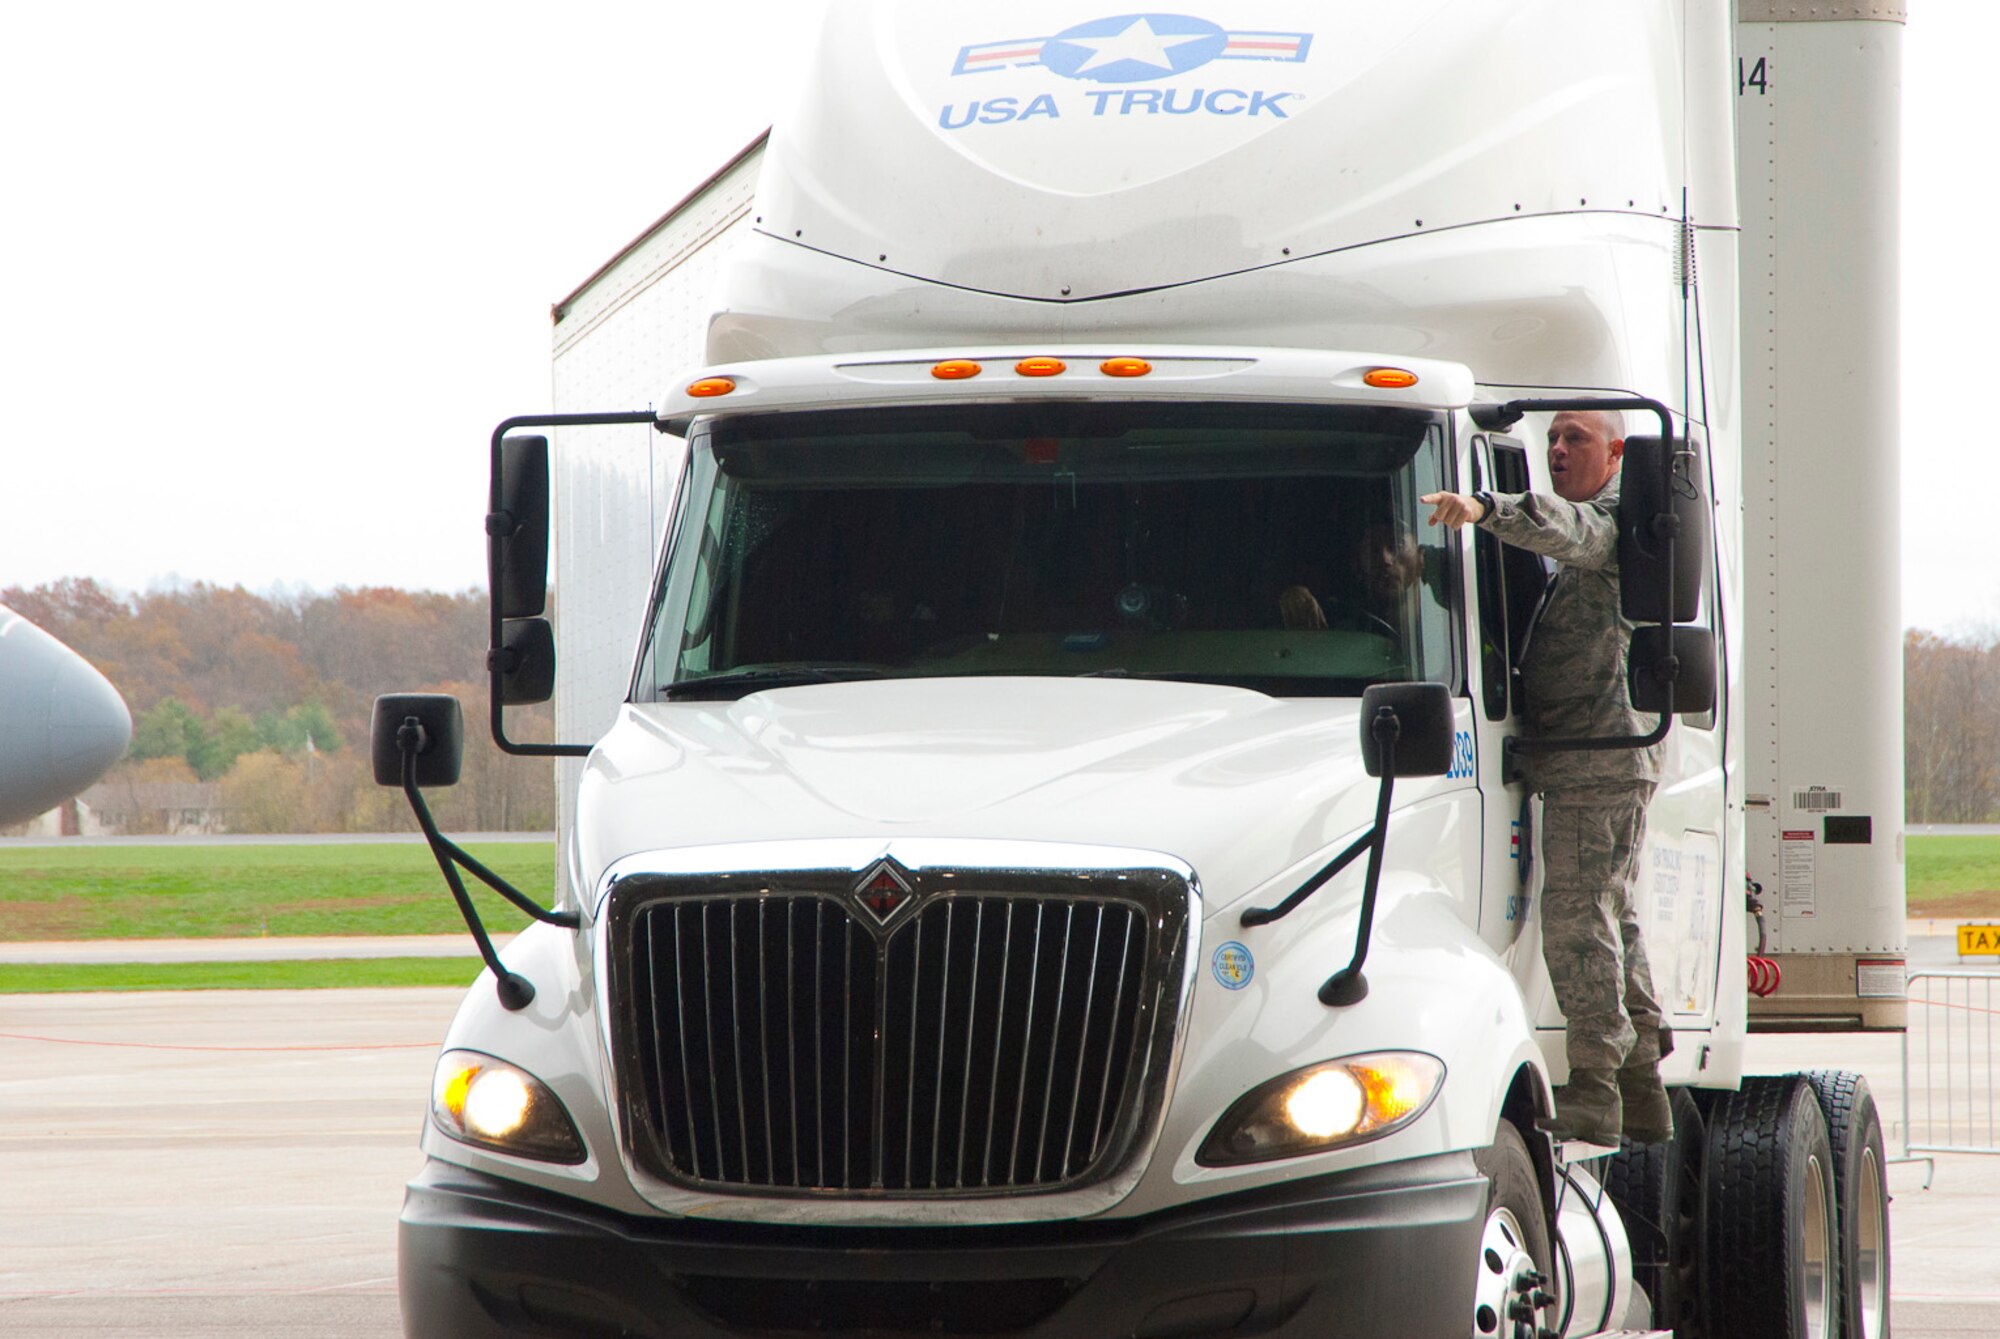 Master Sgt. Jodi Miller directs the driver of a FEMA tractor and trailer to a parking area inside a hangar at the 167th Airlift Wing, West Virginia Air National Guard, based in Martinsburg W.Va., Thursday Nov. 1, 2012. The 167th AW is serving as a staging area for disaster relief supplies which will then be transported throughout West Virginia as needed. The West Virginia National Guard has over 200 members aiding in recovery efforts from Hurricane Sandy.  The storm blanketed the state with heavy snow and rains and also had severe winds that left homes and properties damaged.  Guardsmen are involved in numerous aspects of the operations from search and rescue missions to debris removal. (Air National Guard photo by Master Sgt. Emily Beightol-Deyerle)